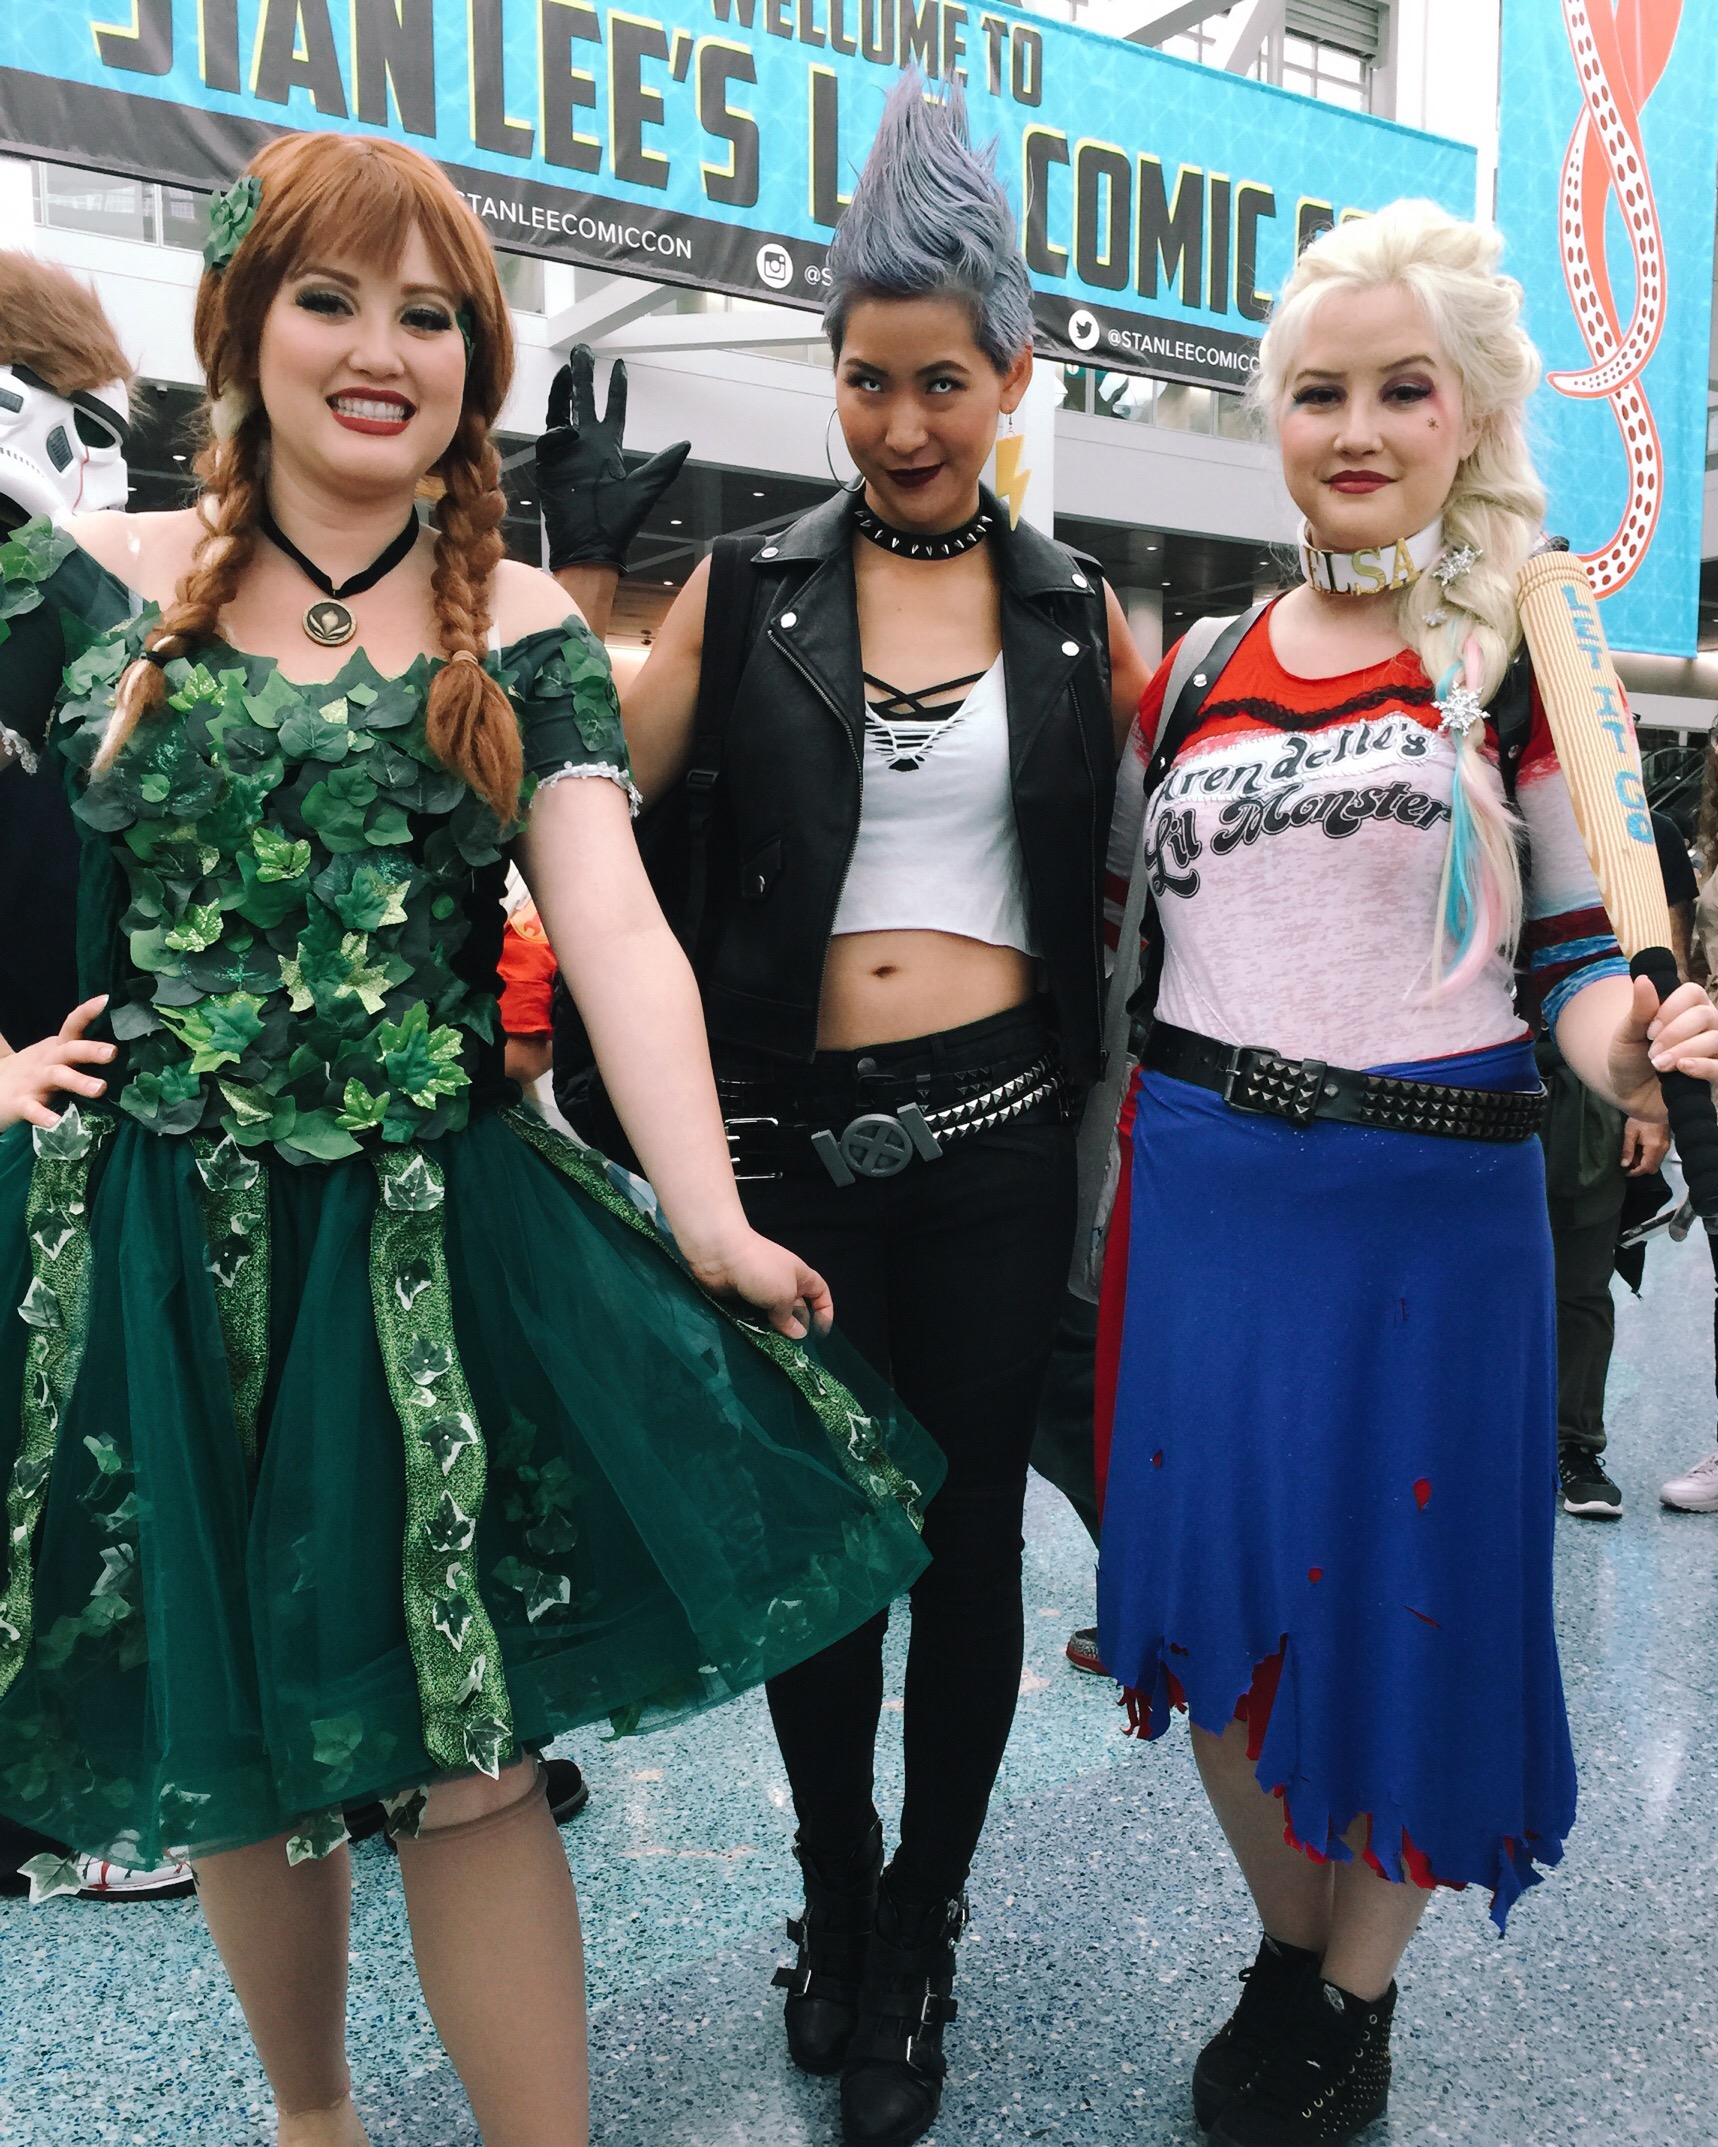 Disney Twincess - Poison Ivy and Harley Quinn - the stylish geek